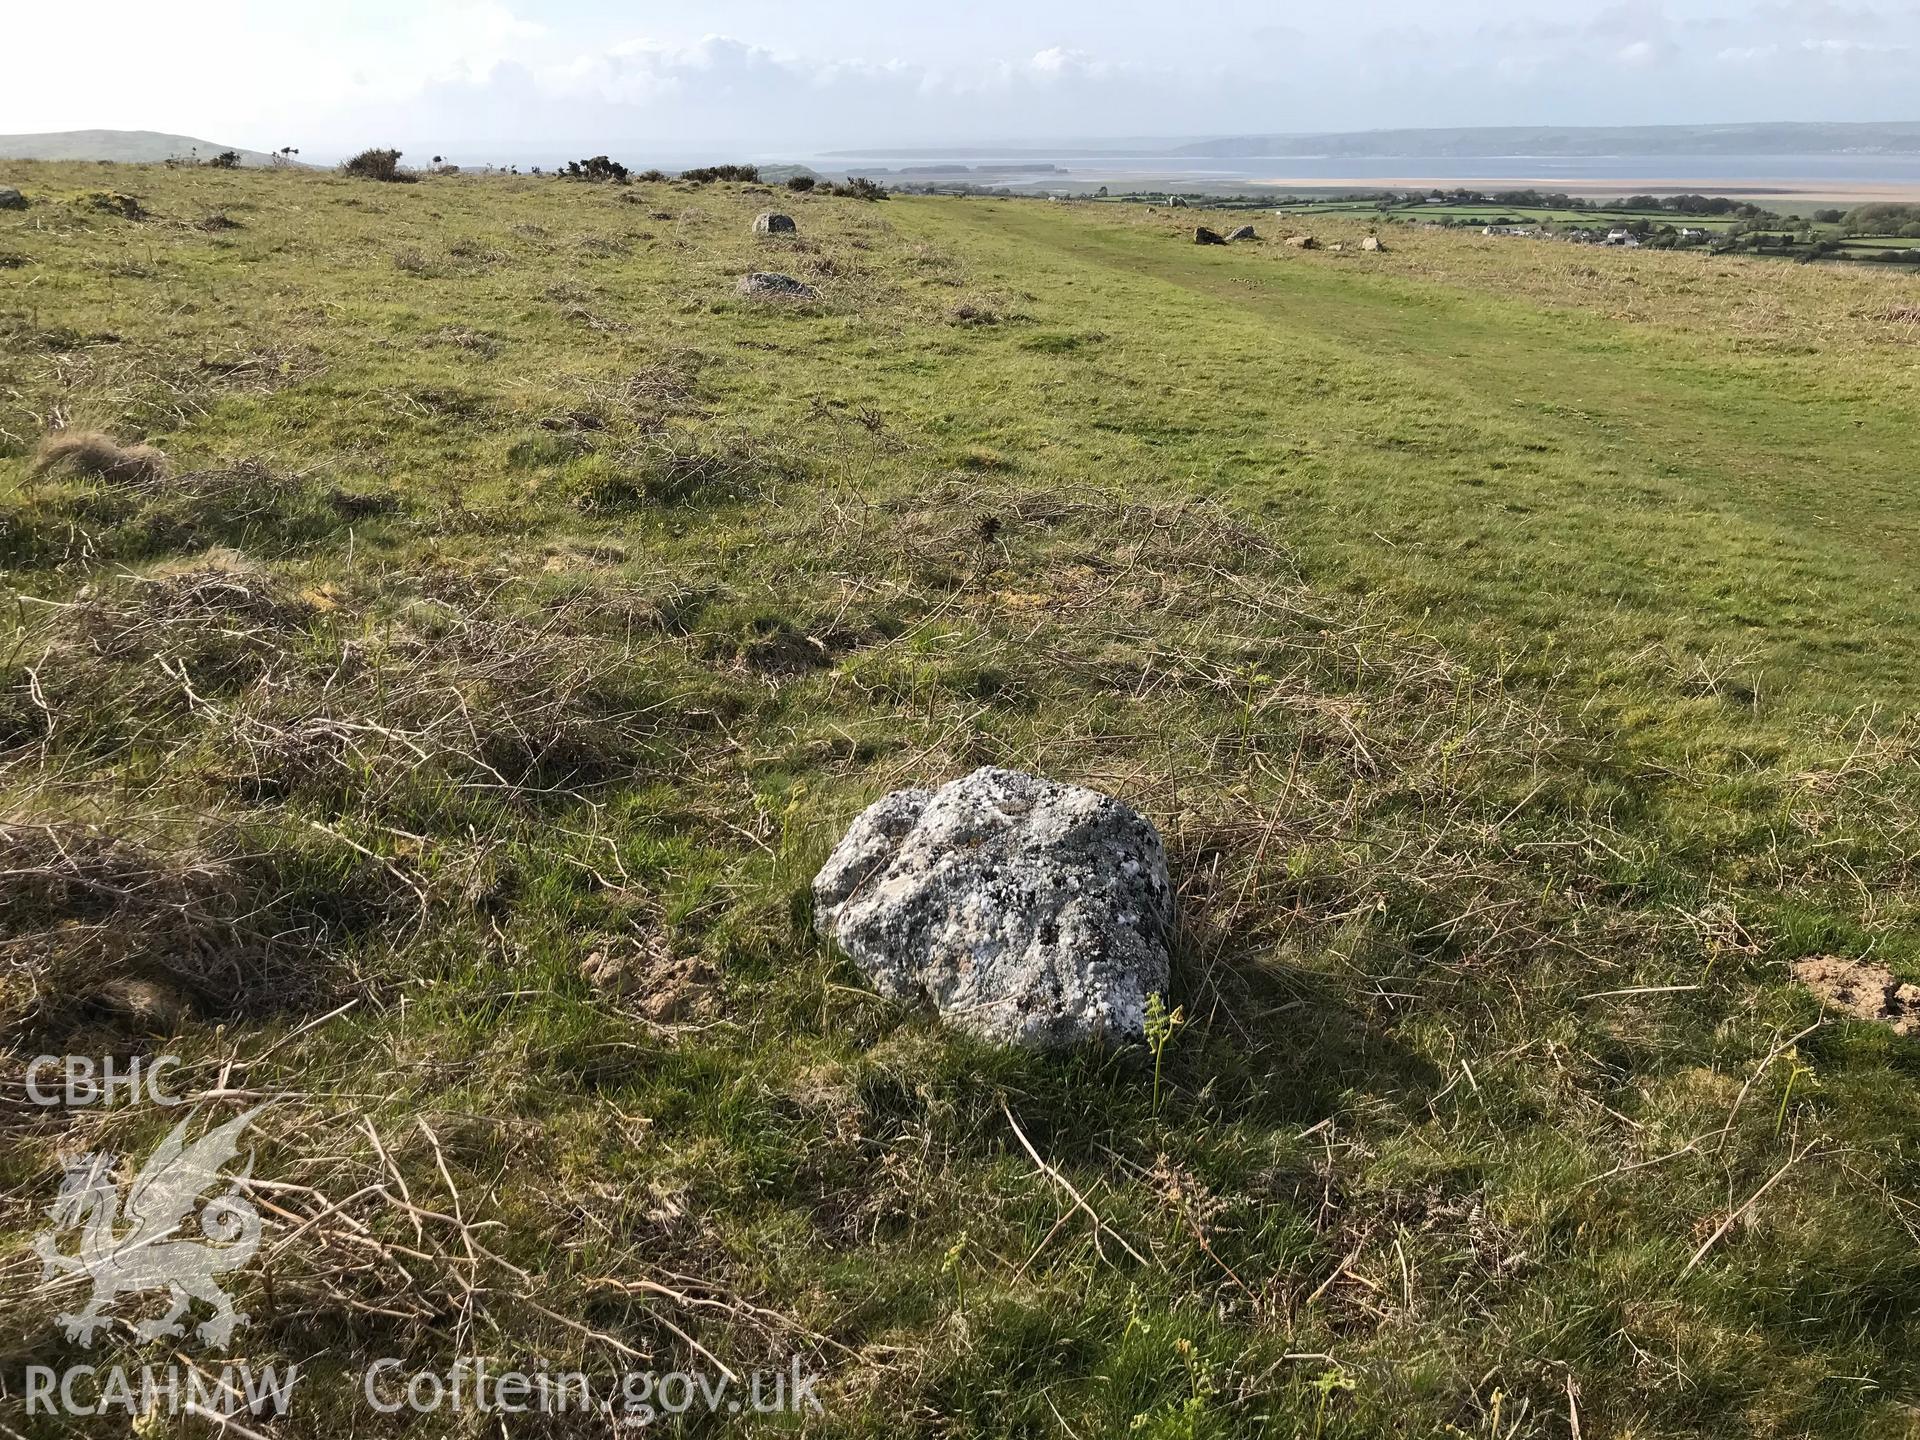 Colour photo showing a possible stone alignment at Cefn Bryn, taken by Paul R. Davis, 10th May 2018.